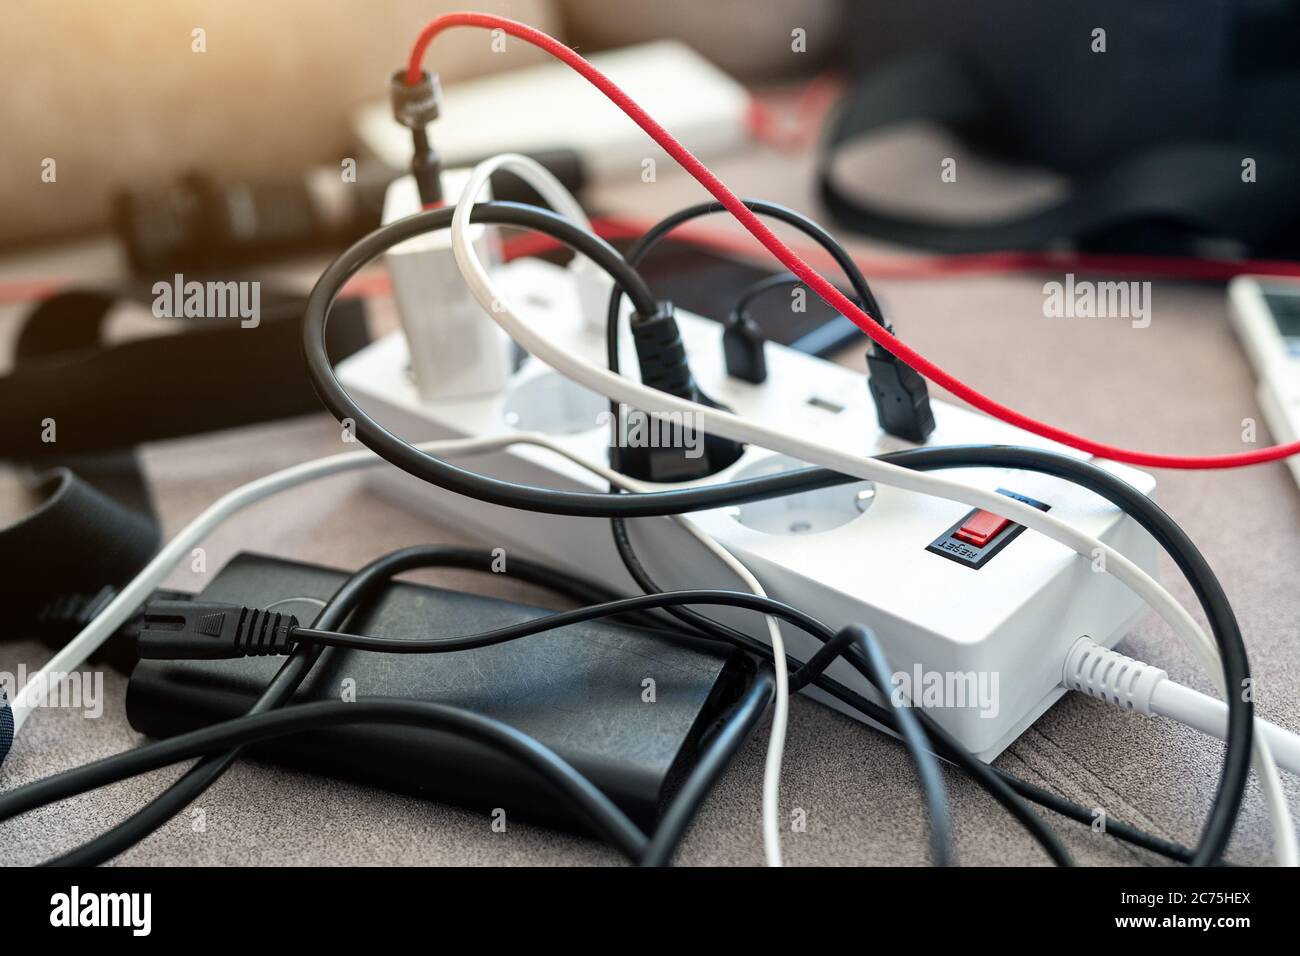 Overloaded power socket plug extendion at home. Tangled cords of home appliances and chargins gadgets mess Stock Photo